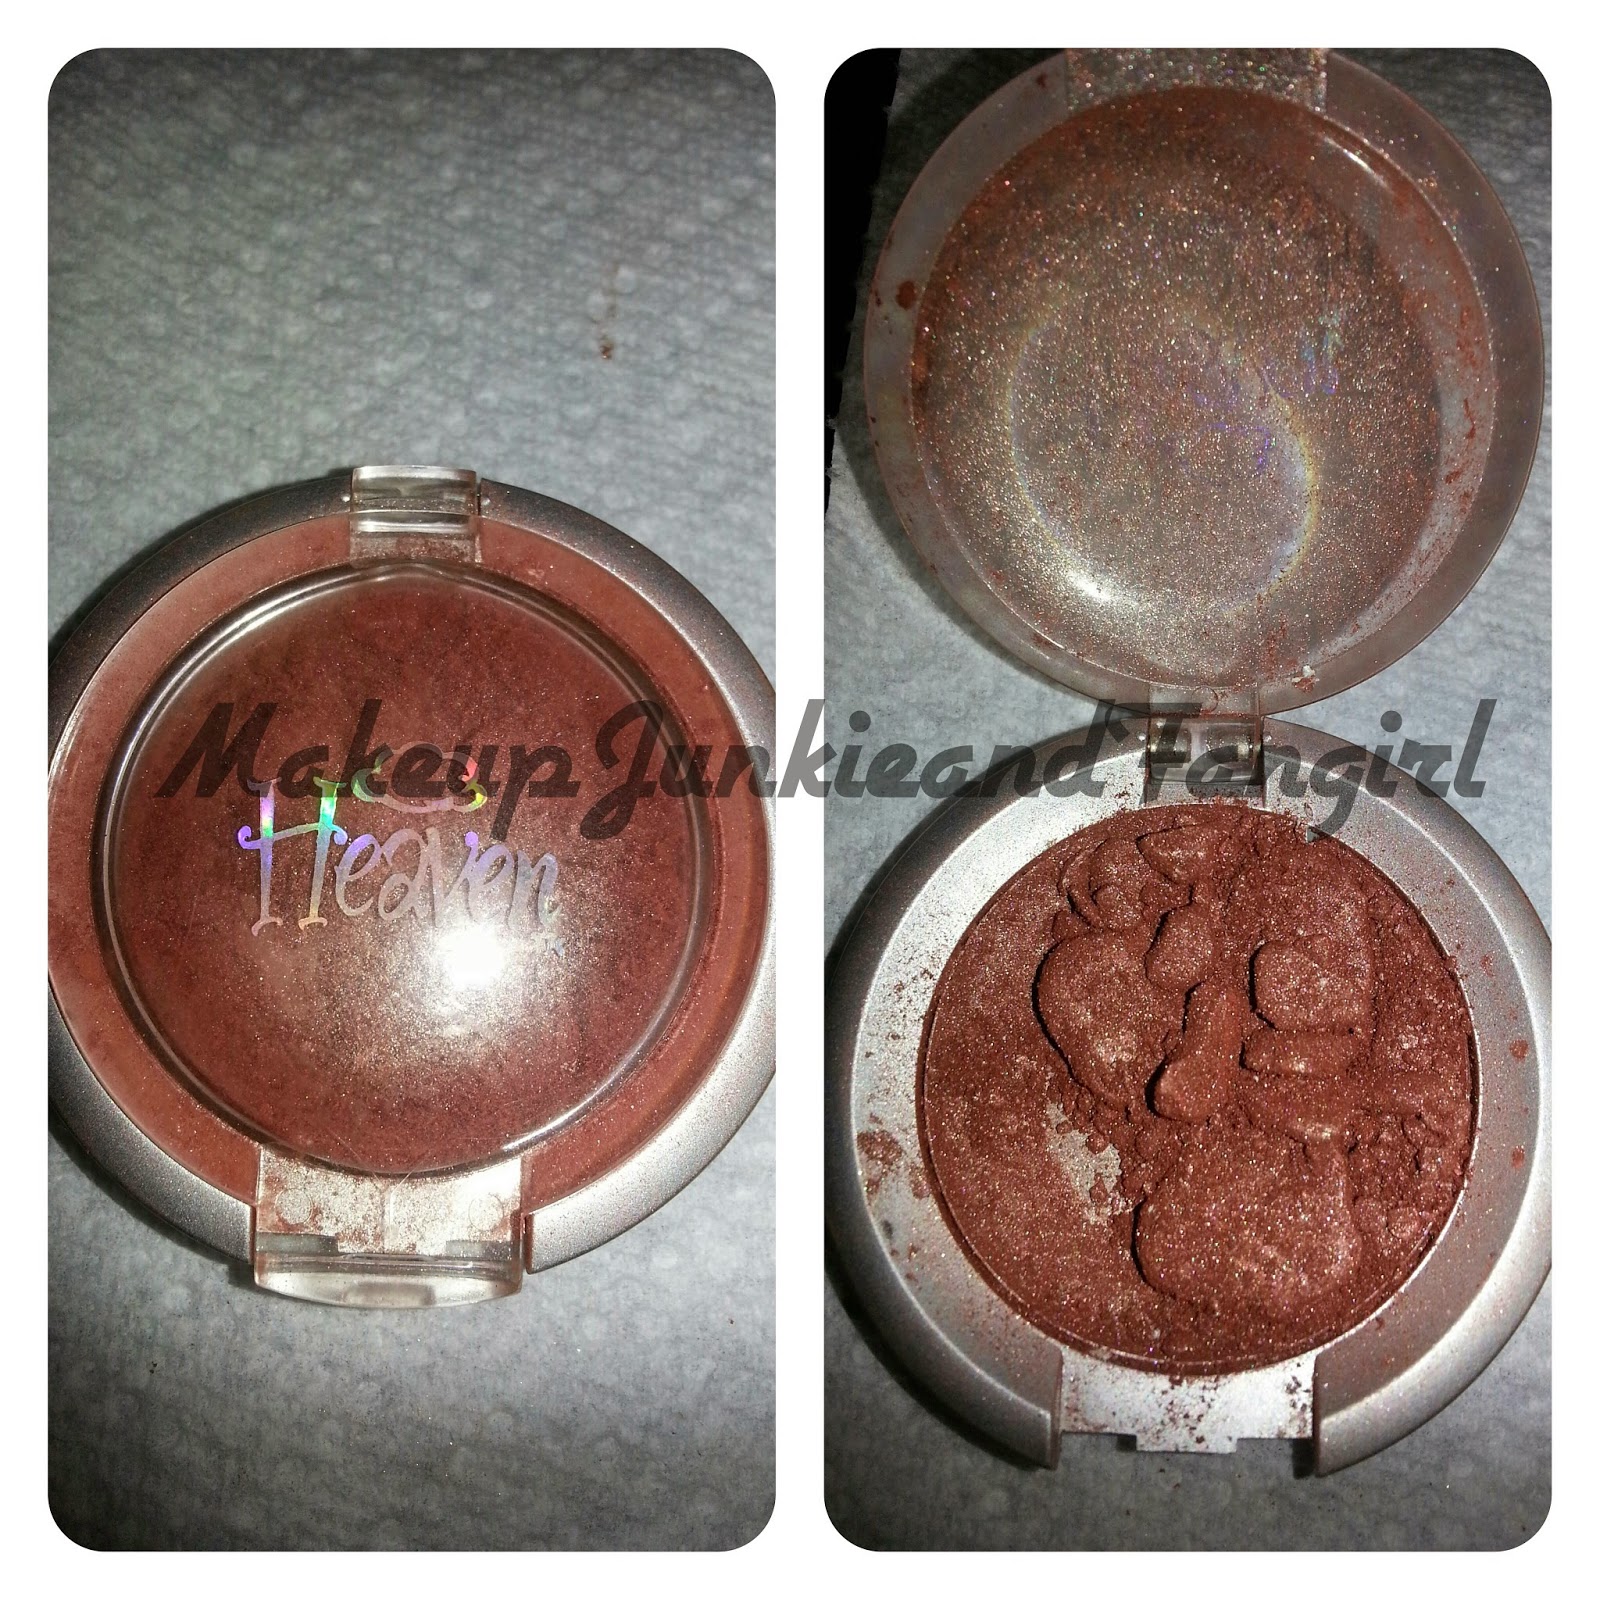 Makeup Junkie and Fangirl: How I fixed my broken eyeshadow